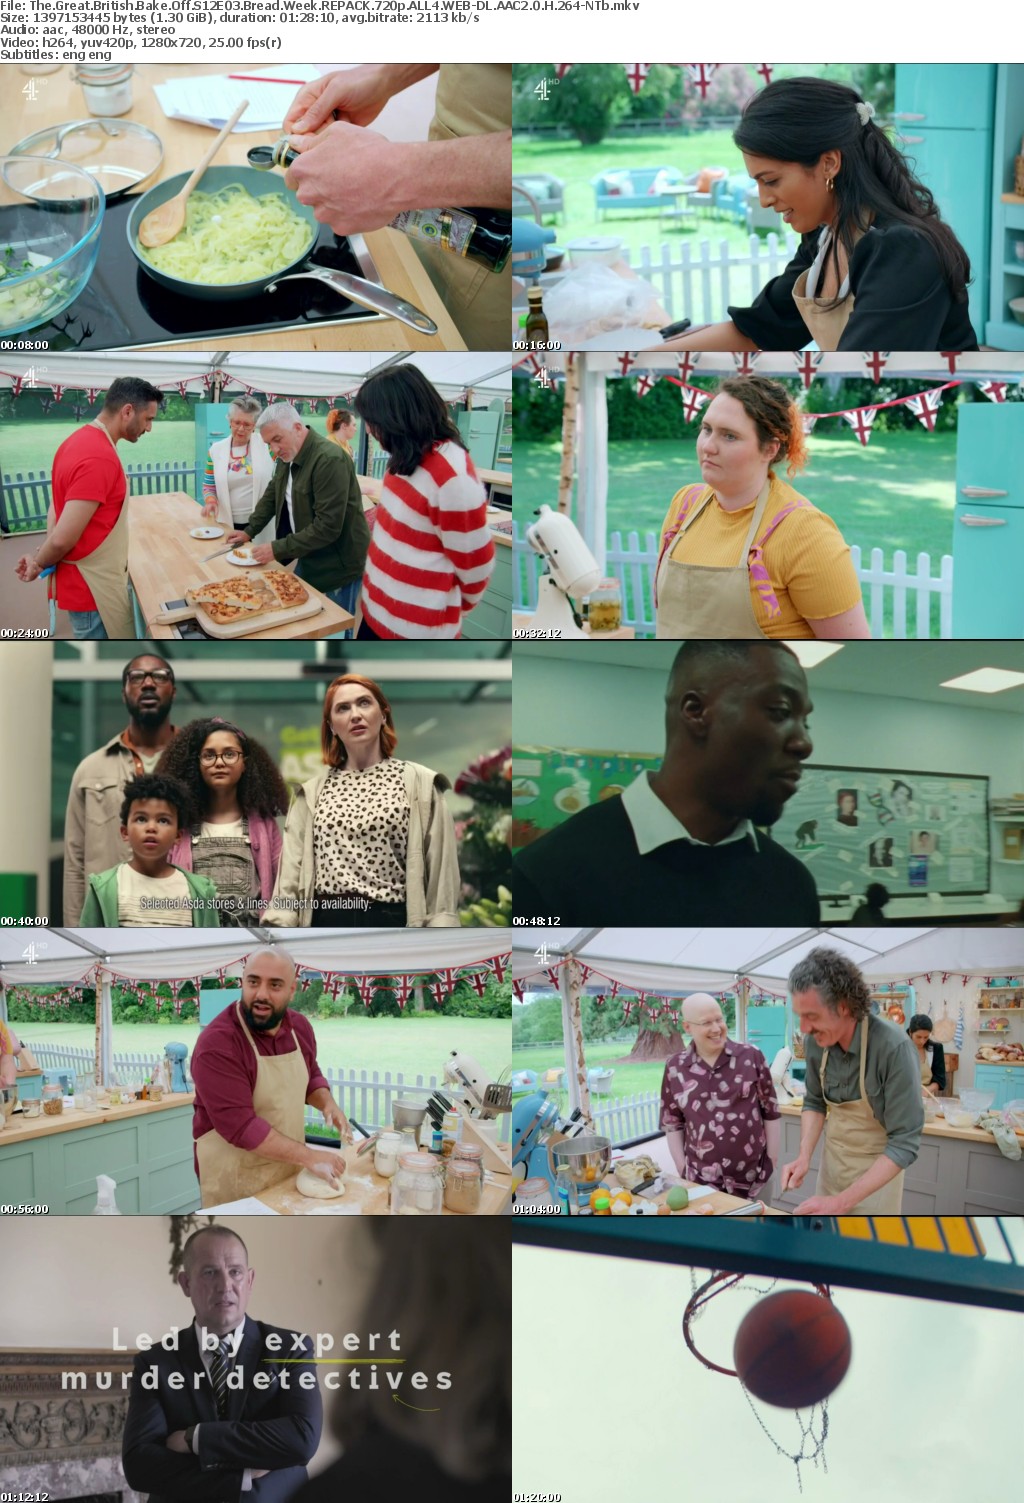 The Great British Bake Off S12E03 Bread Week REPACK 720p ALL4 WEBRip AAC2 0 H264-NTb